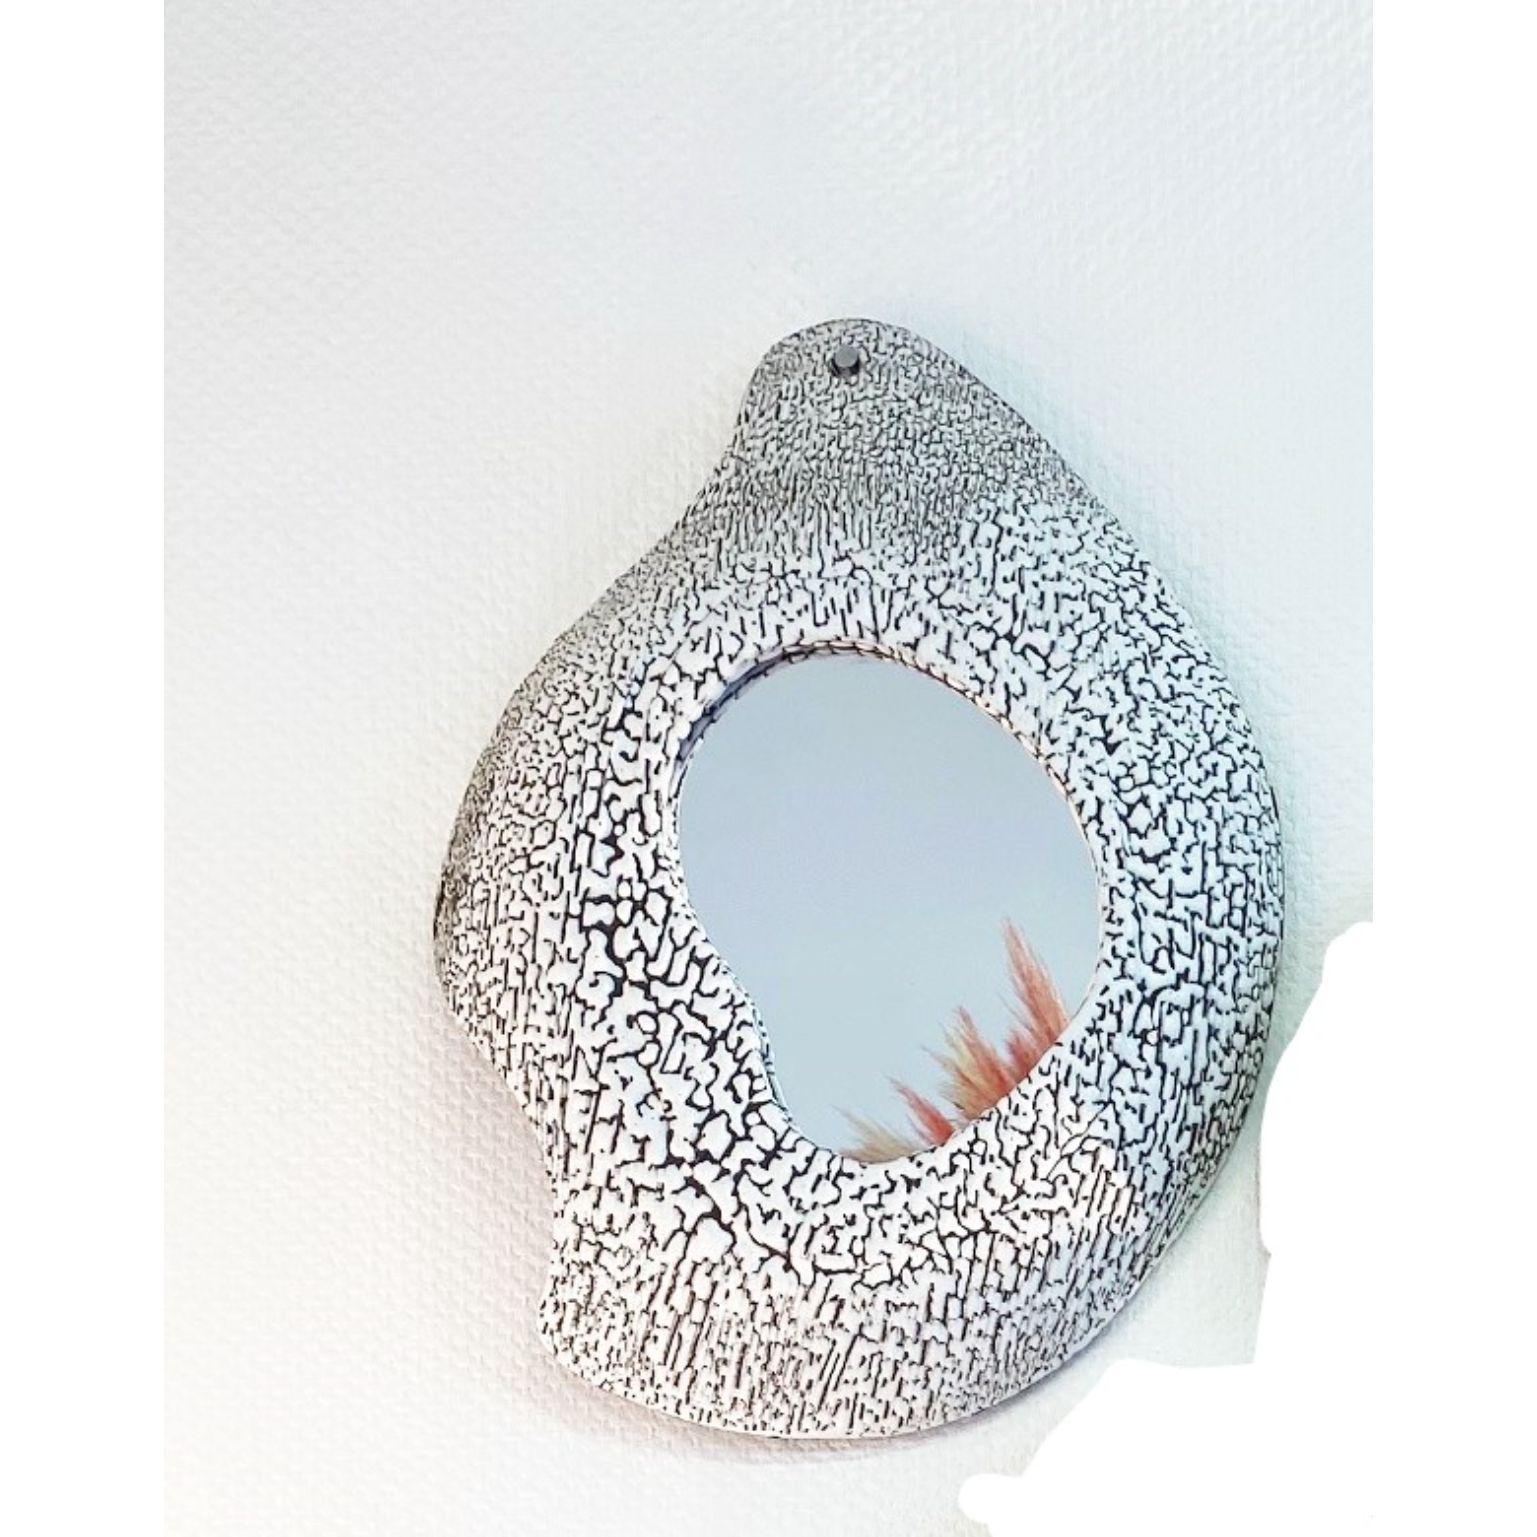 Large ceramic mirror by Olivia Cognet
Materials: Ceramic
Dimensions: Large around 45-55 cm tall

Different sizes and finishes available.

Each of Olivia’s handmade creations is a unique work of art, the snapshot of a precious moment captured